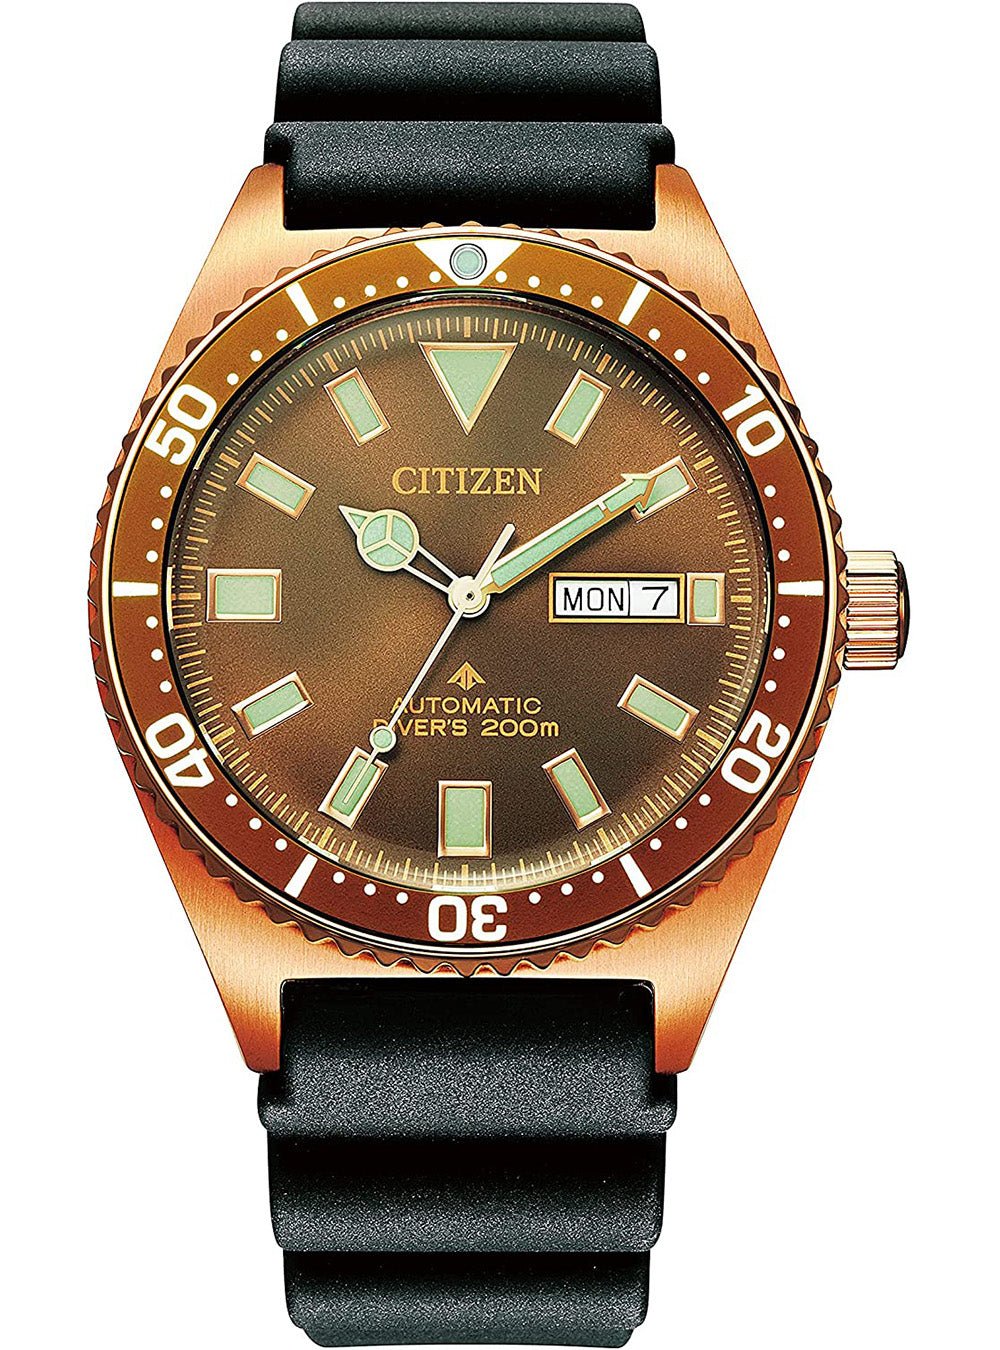 CITIZEN PROMASTER MARINE SERIES MECHANICAL DIVER NY0125-08W